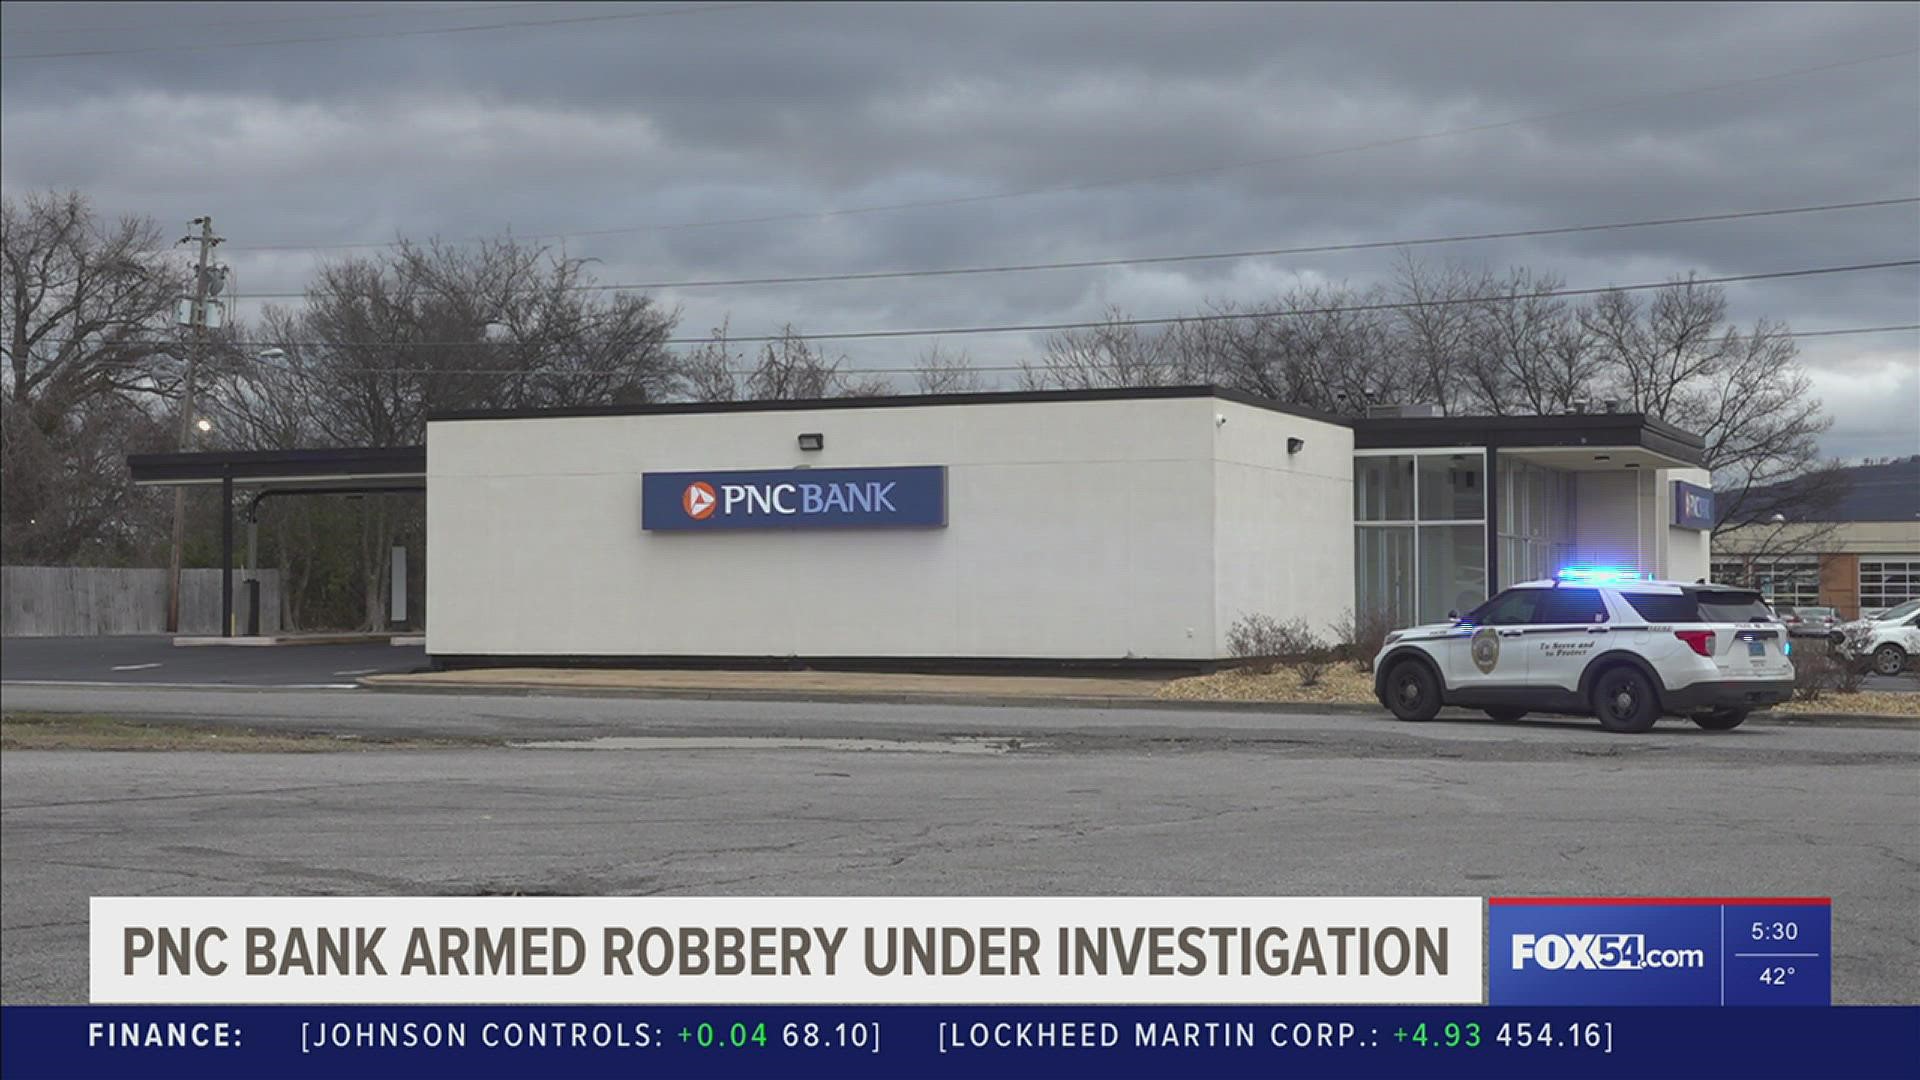 Police are searching for three suspects thought to be involved in the Country Club Avenue PNC Bank Robbery on January 25, 2023.